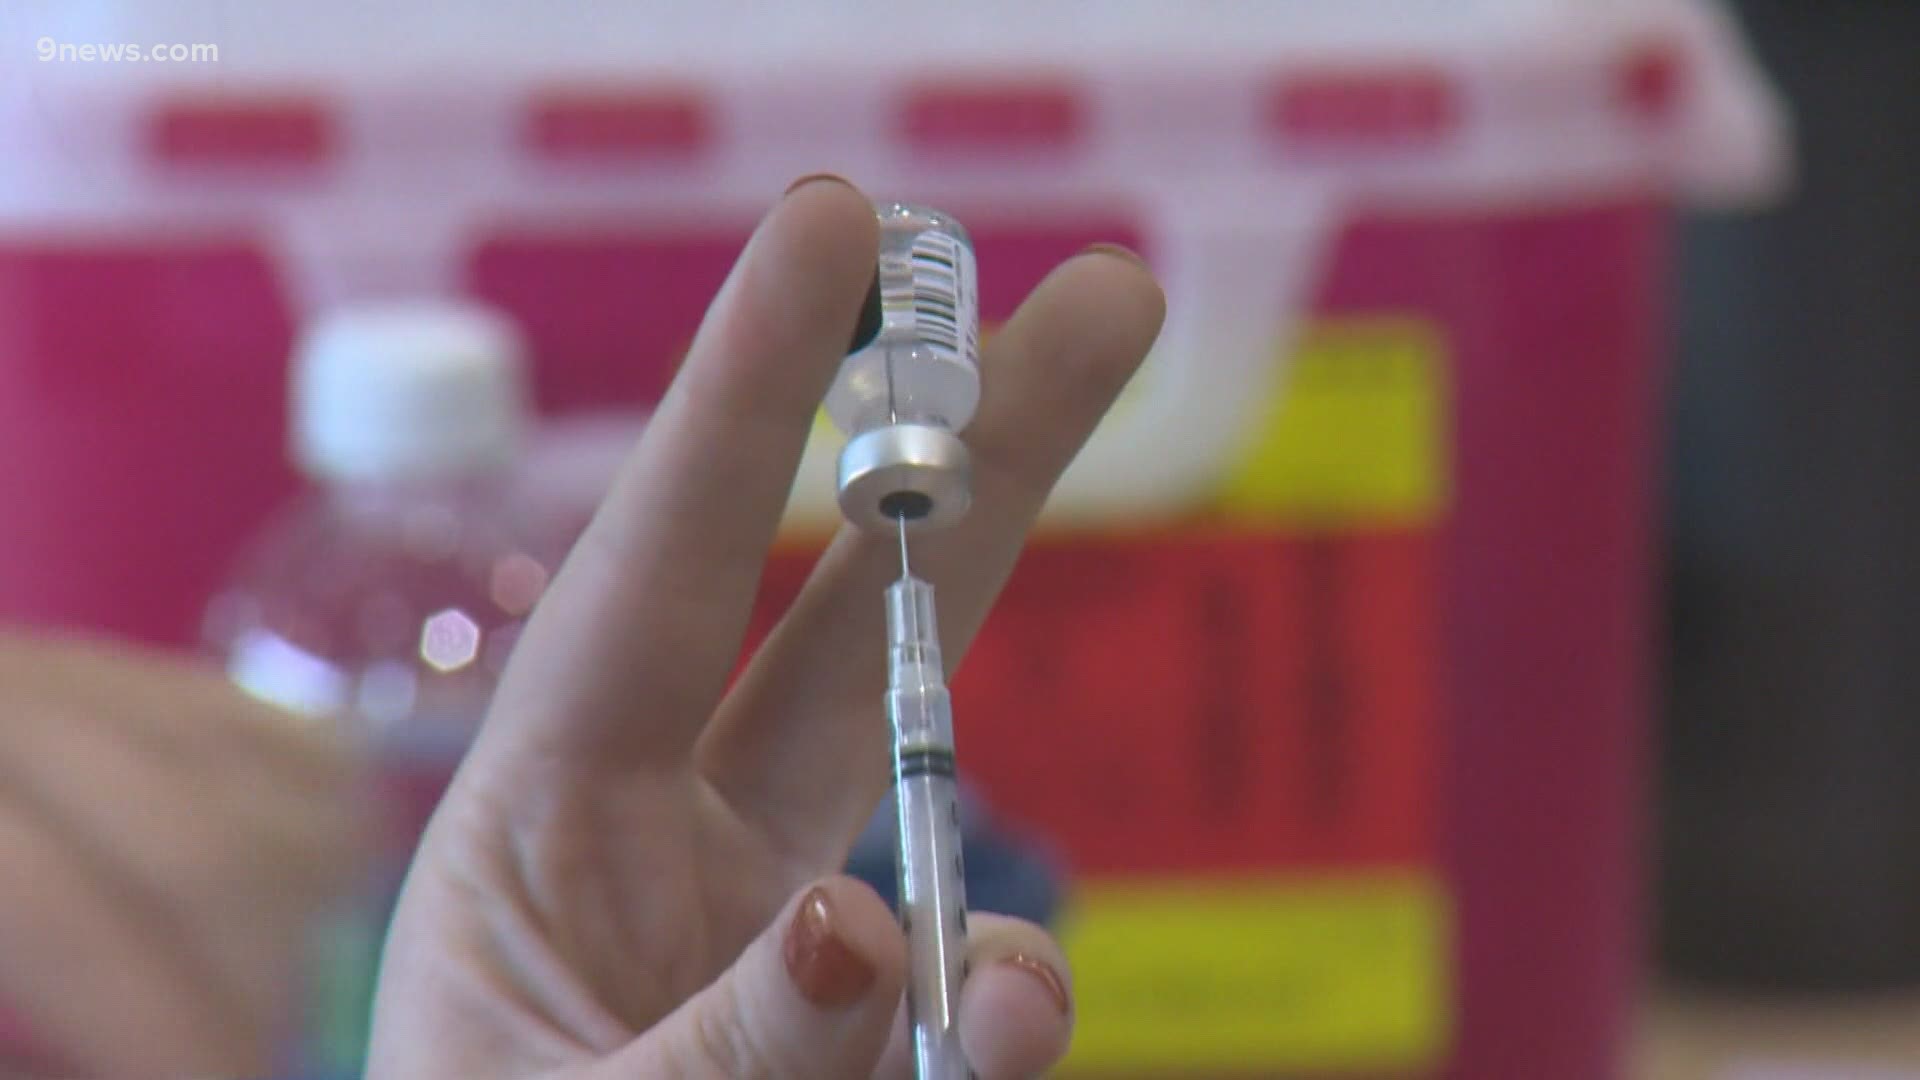 State and local businesses are promoting the COVID-19 vaccine, and there are plenty of incentives offered if you get one.